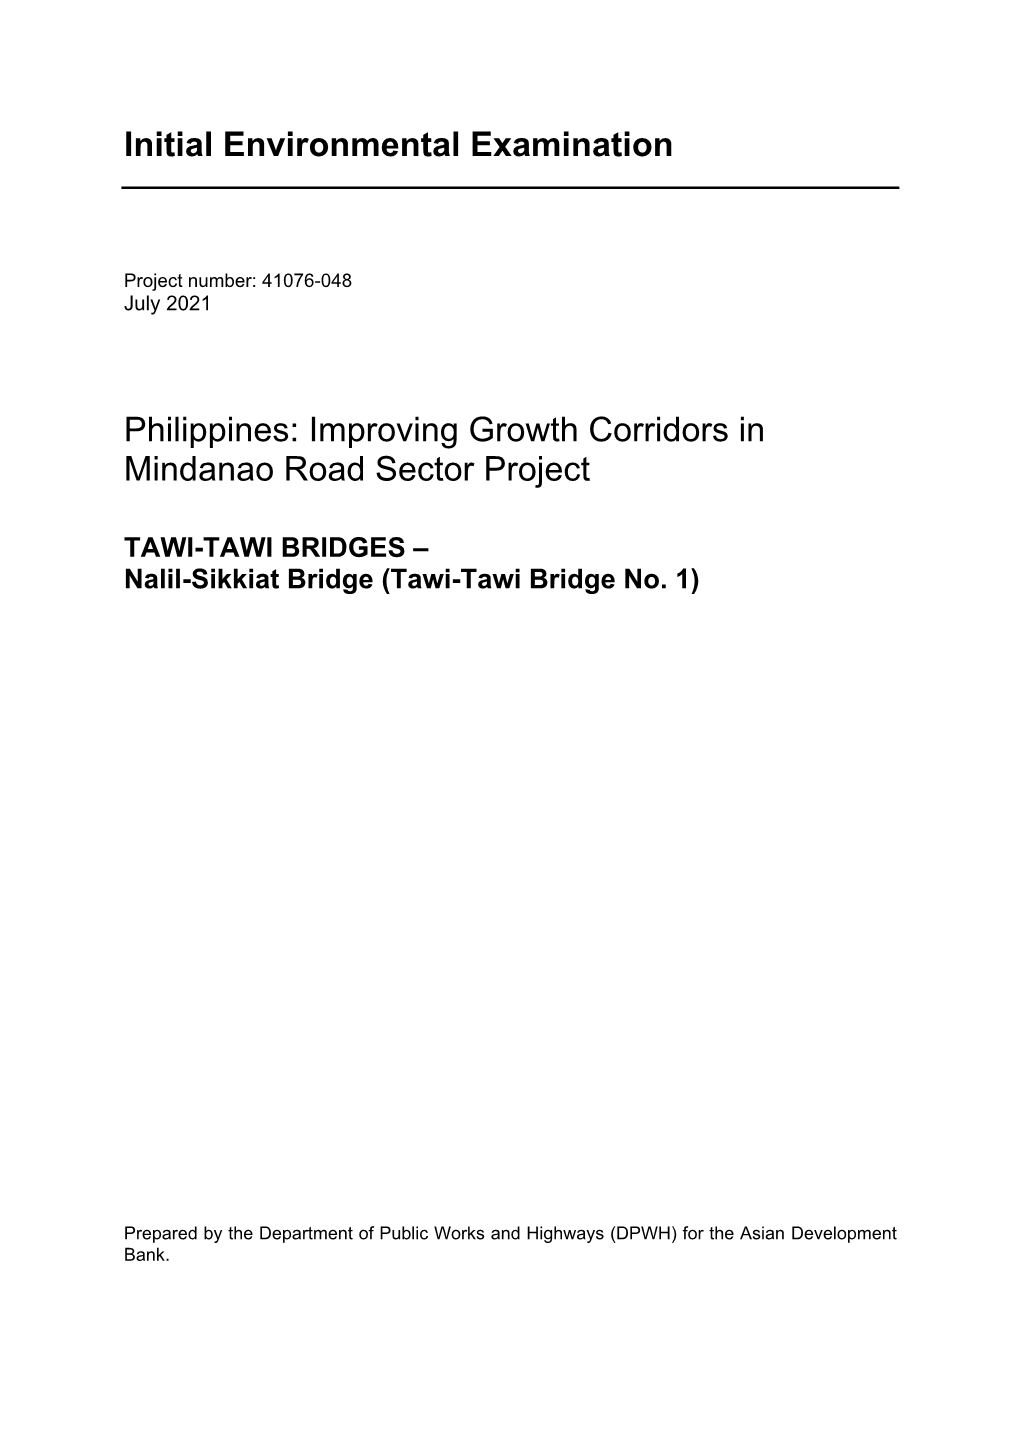 Initial Environmental Examination Philippines: Improving Growth